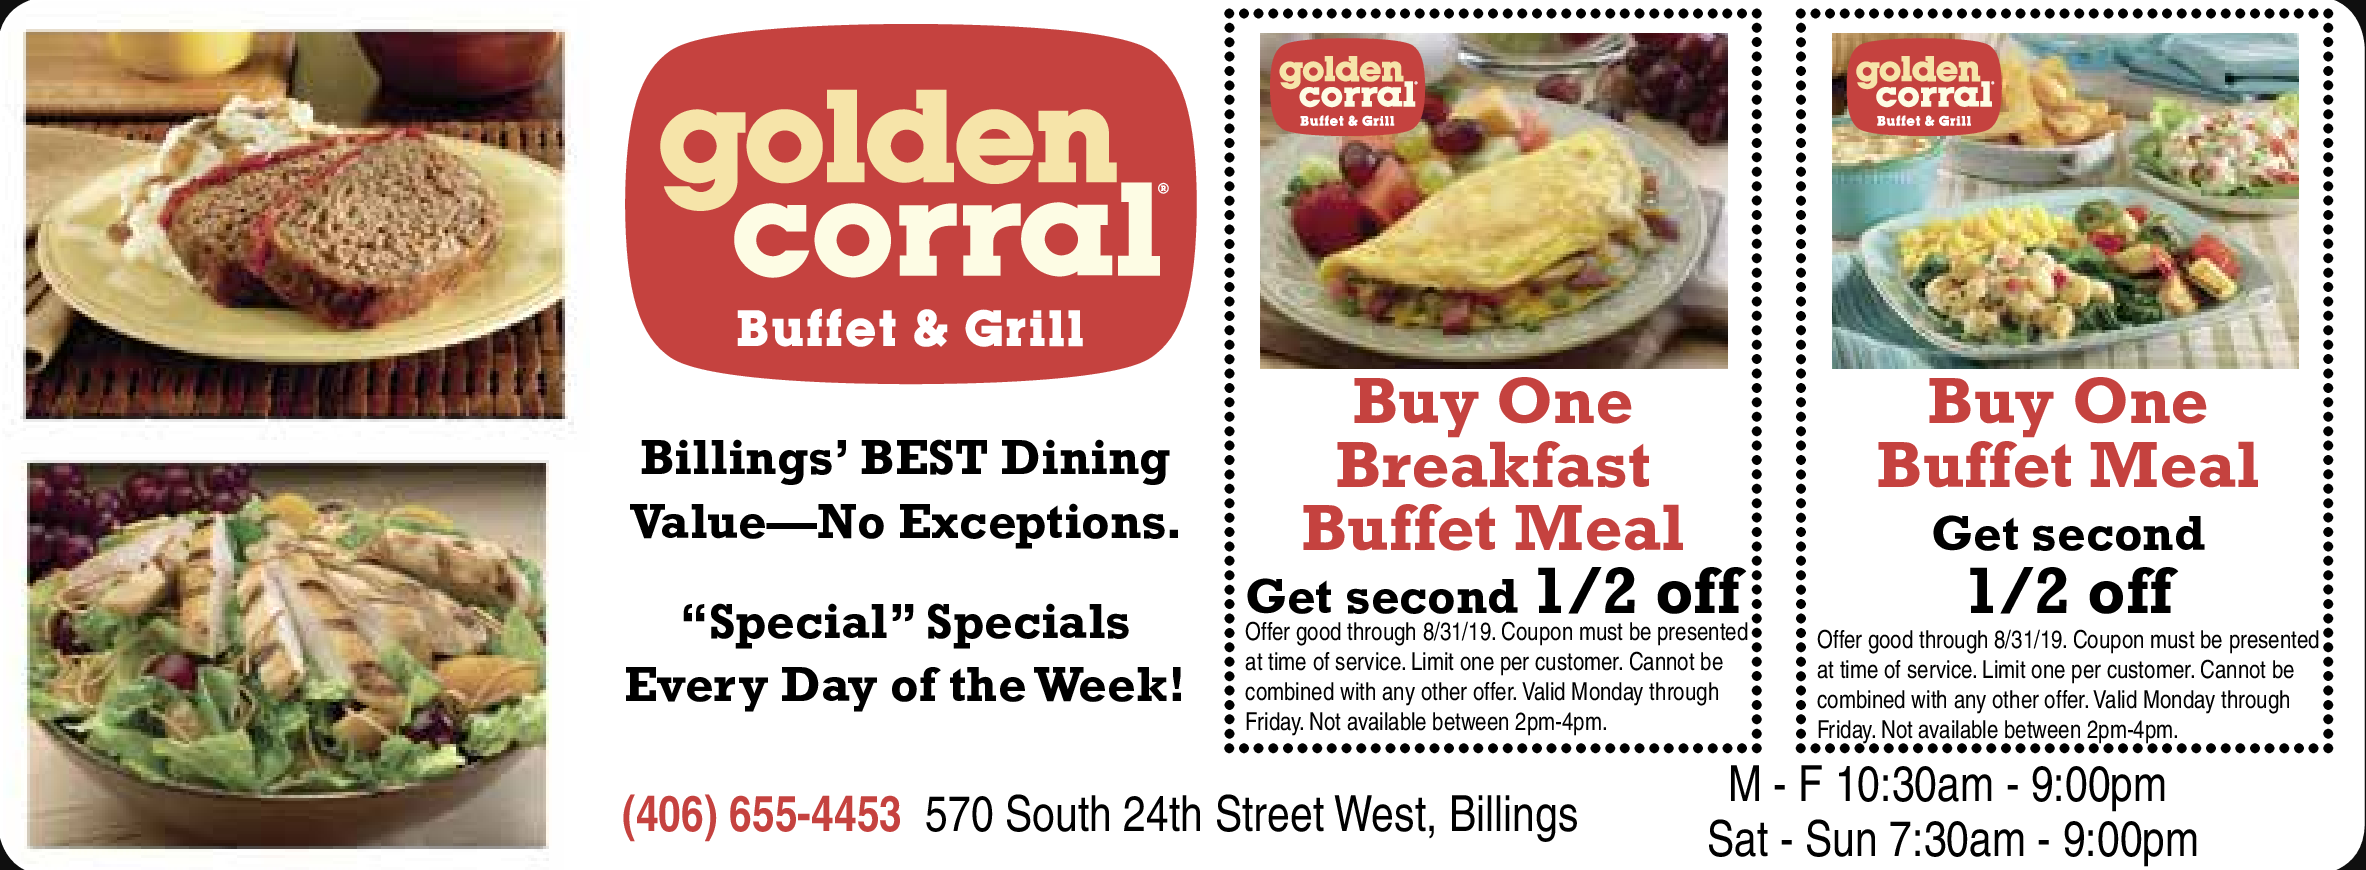 Golden Corral Buffet & Grill Coupons